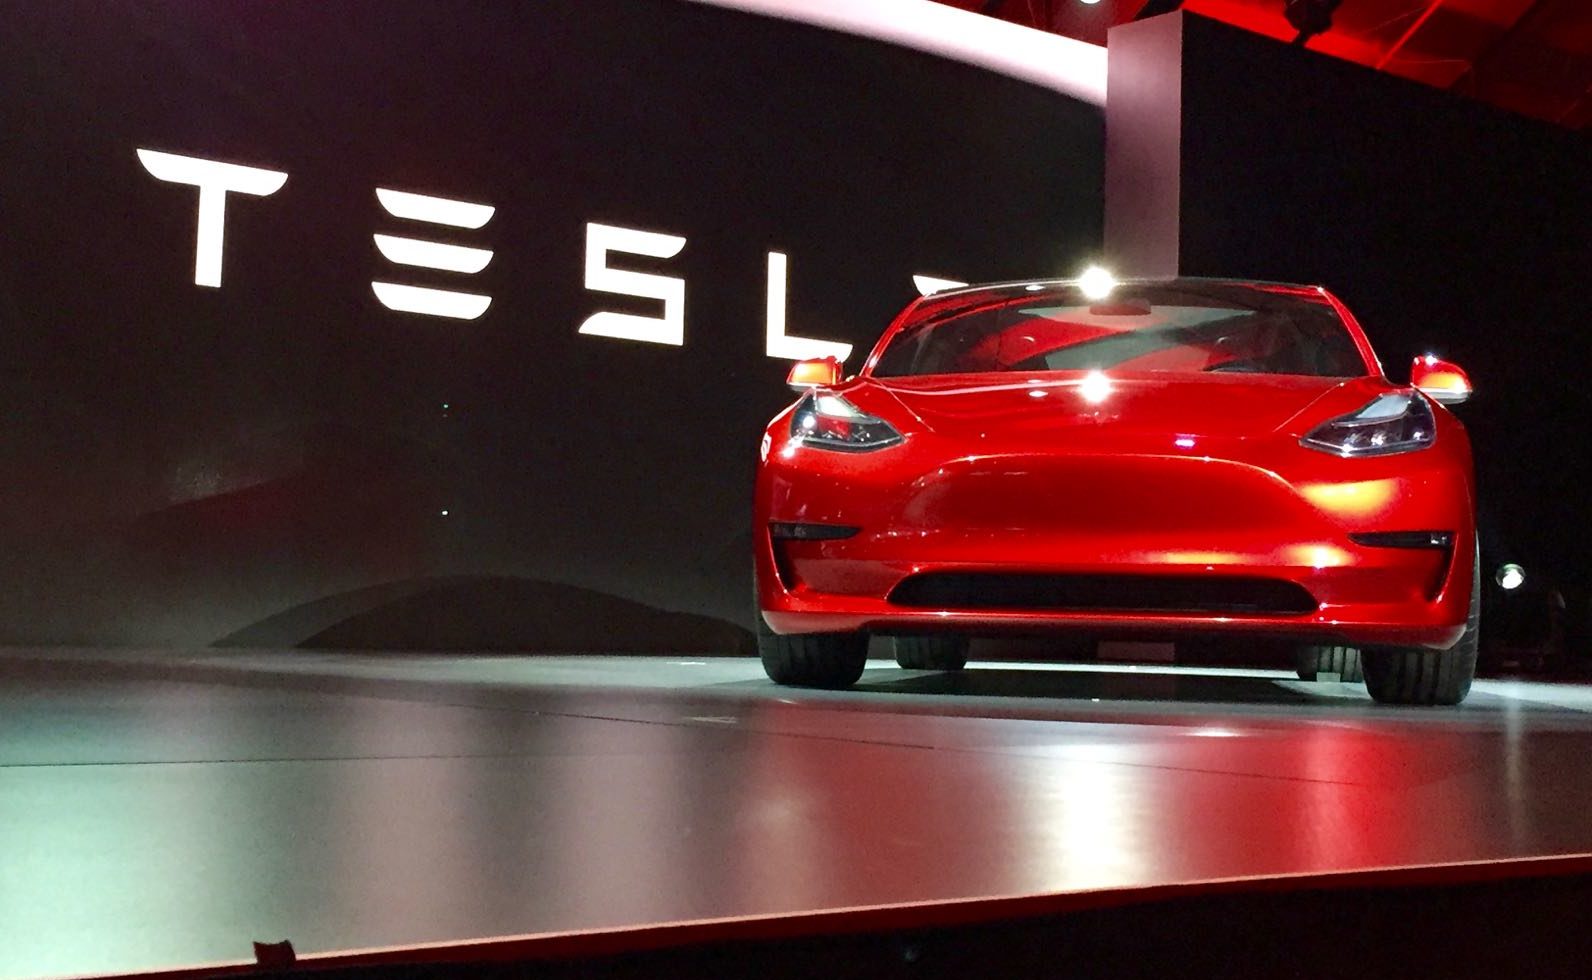 Tesla is coming to Thailand, job openings show